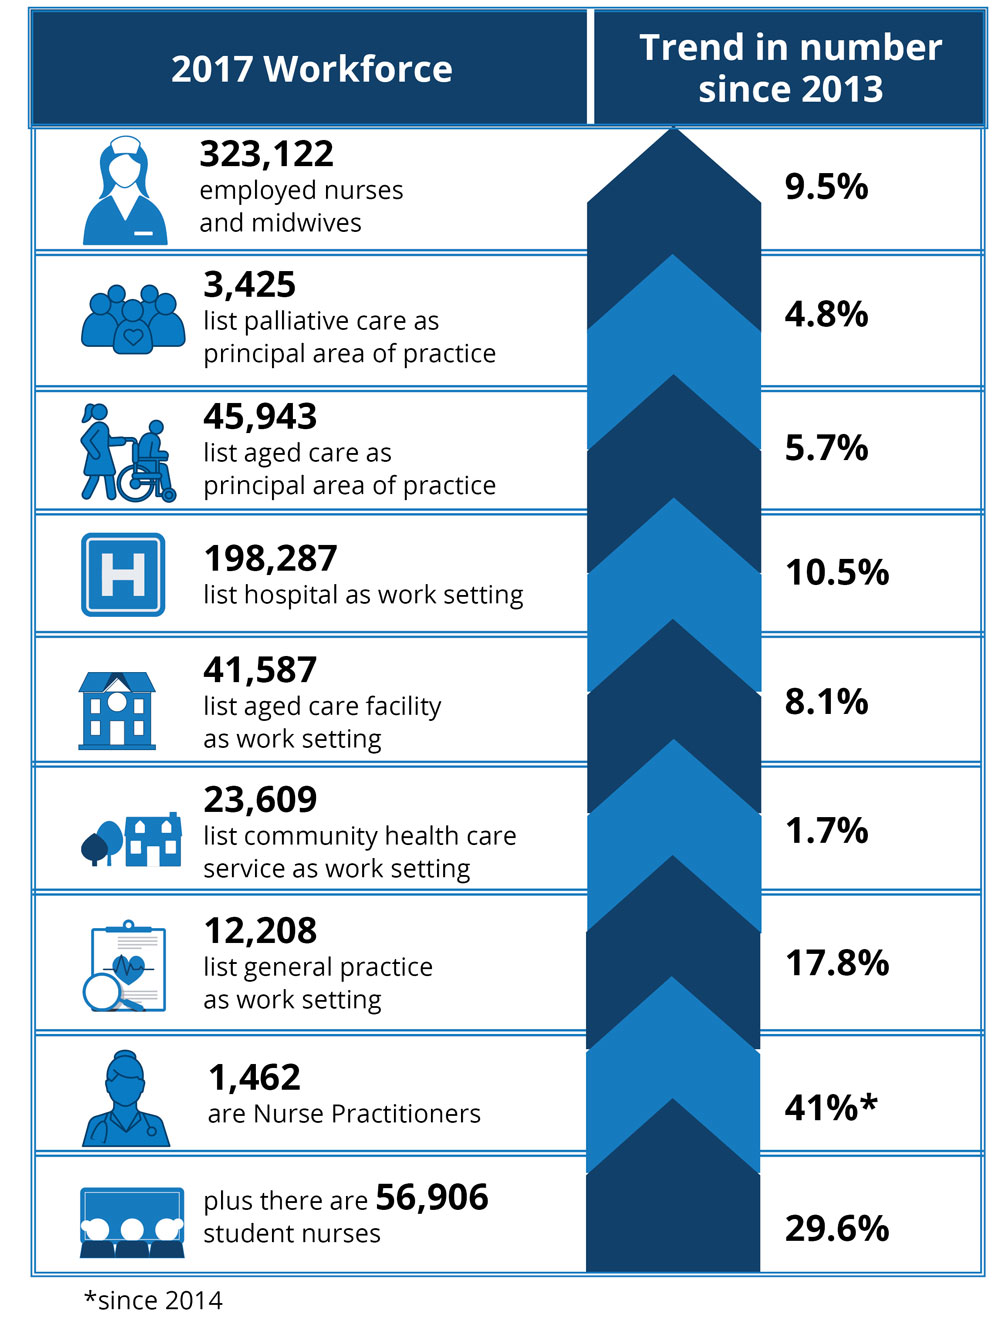 Infographic showing increases in workforce numbers from 2013 to 2017. See https://www.caresearch.com.au/caresearch/tabid/5949/Default.aspx for full detail